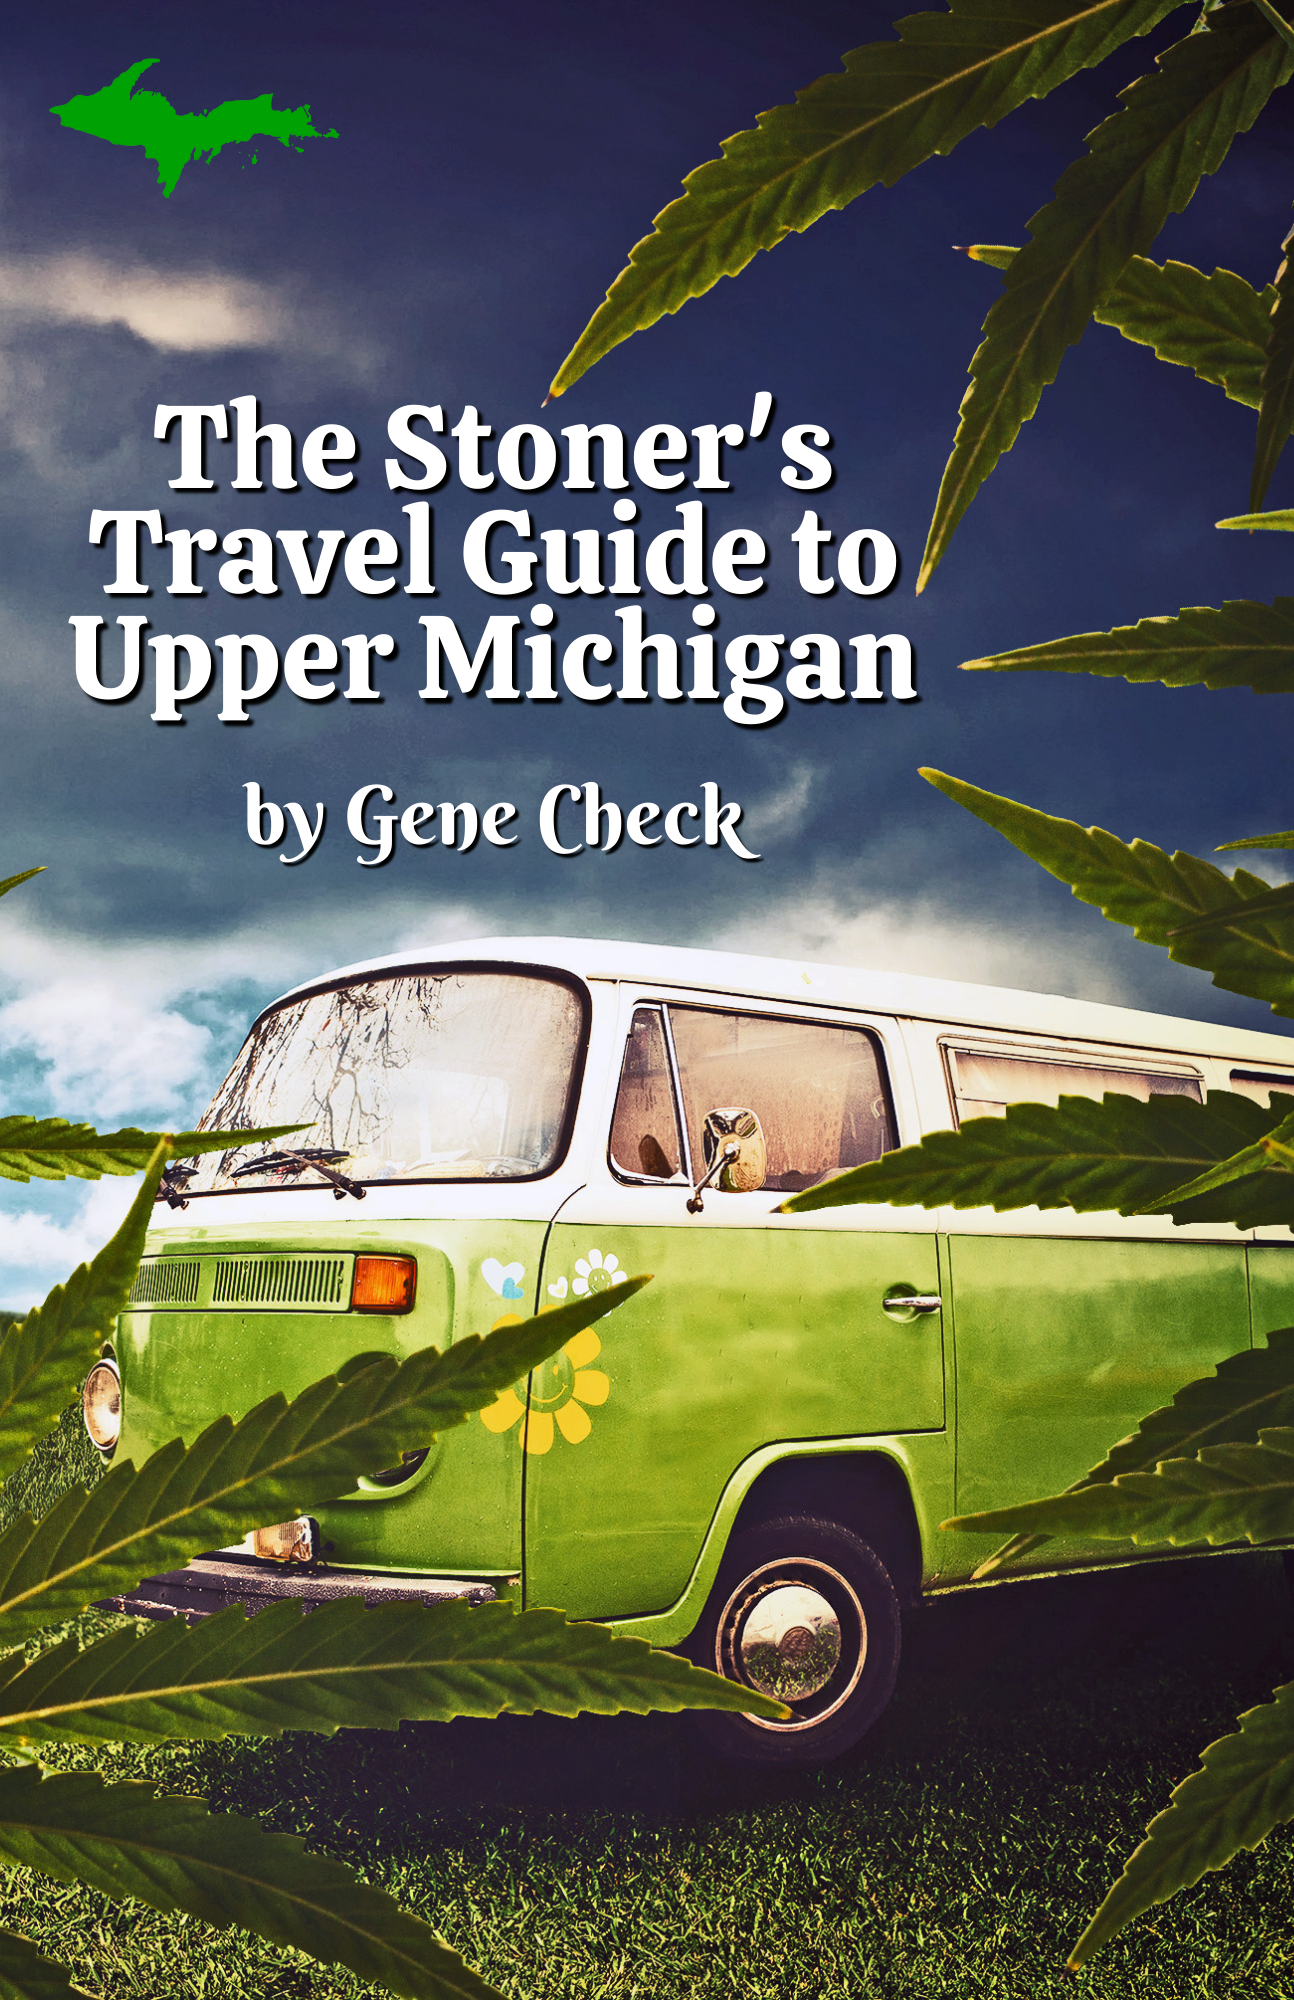 The Stoner's Travel Guide to Upper Michigan Book Cover Mock Up